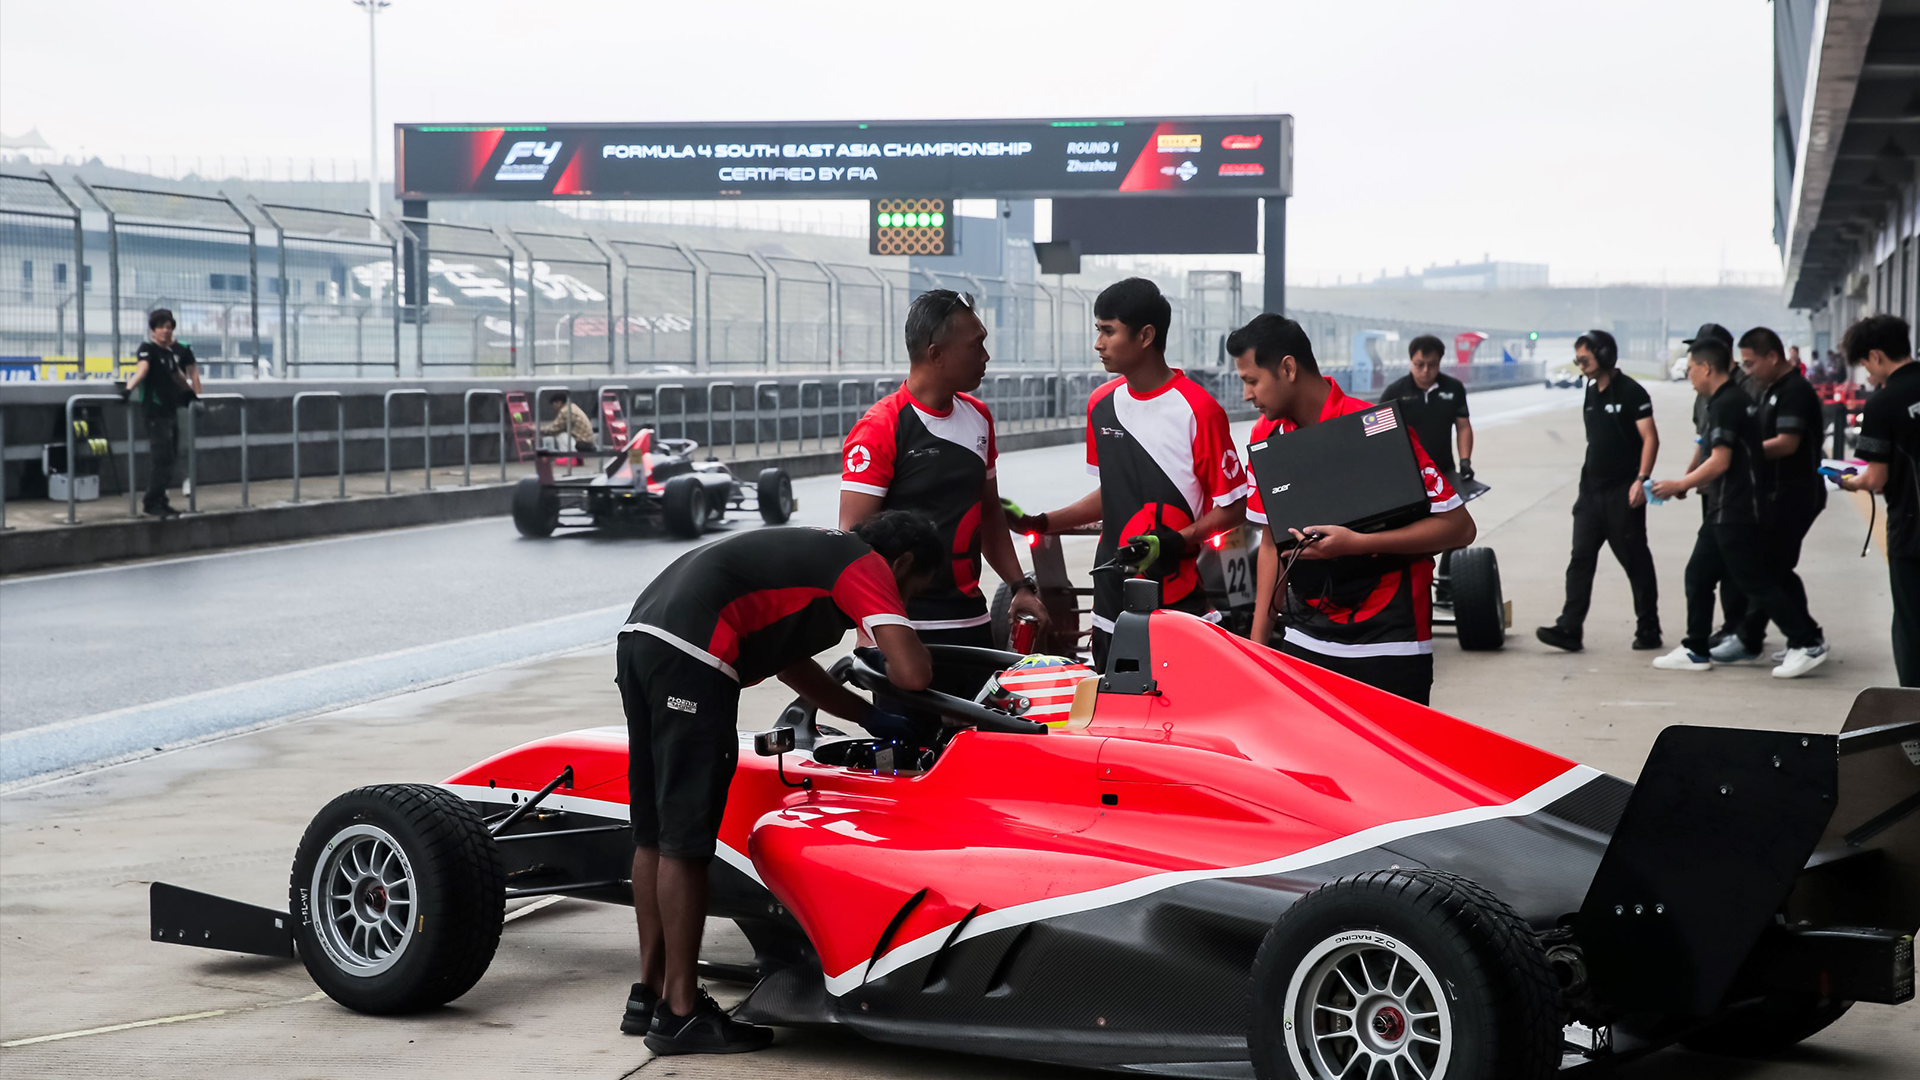 Exciting international line-up for revitalized Formula 4 South East Asia